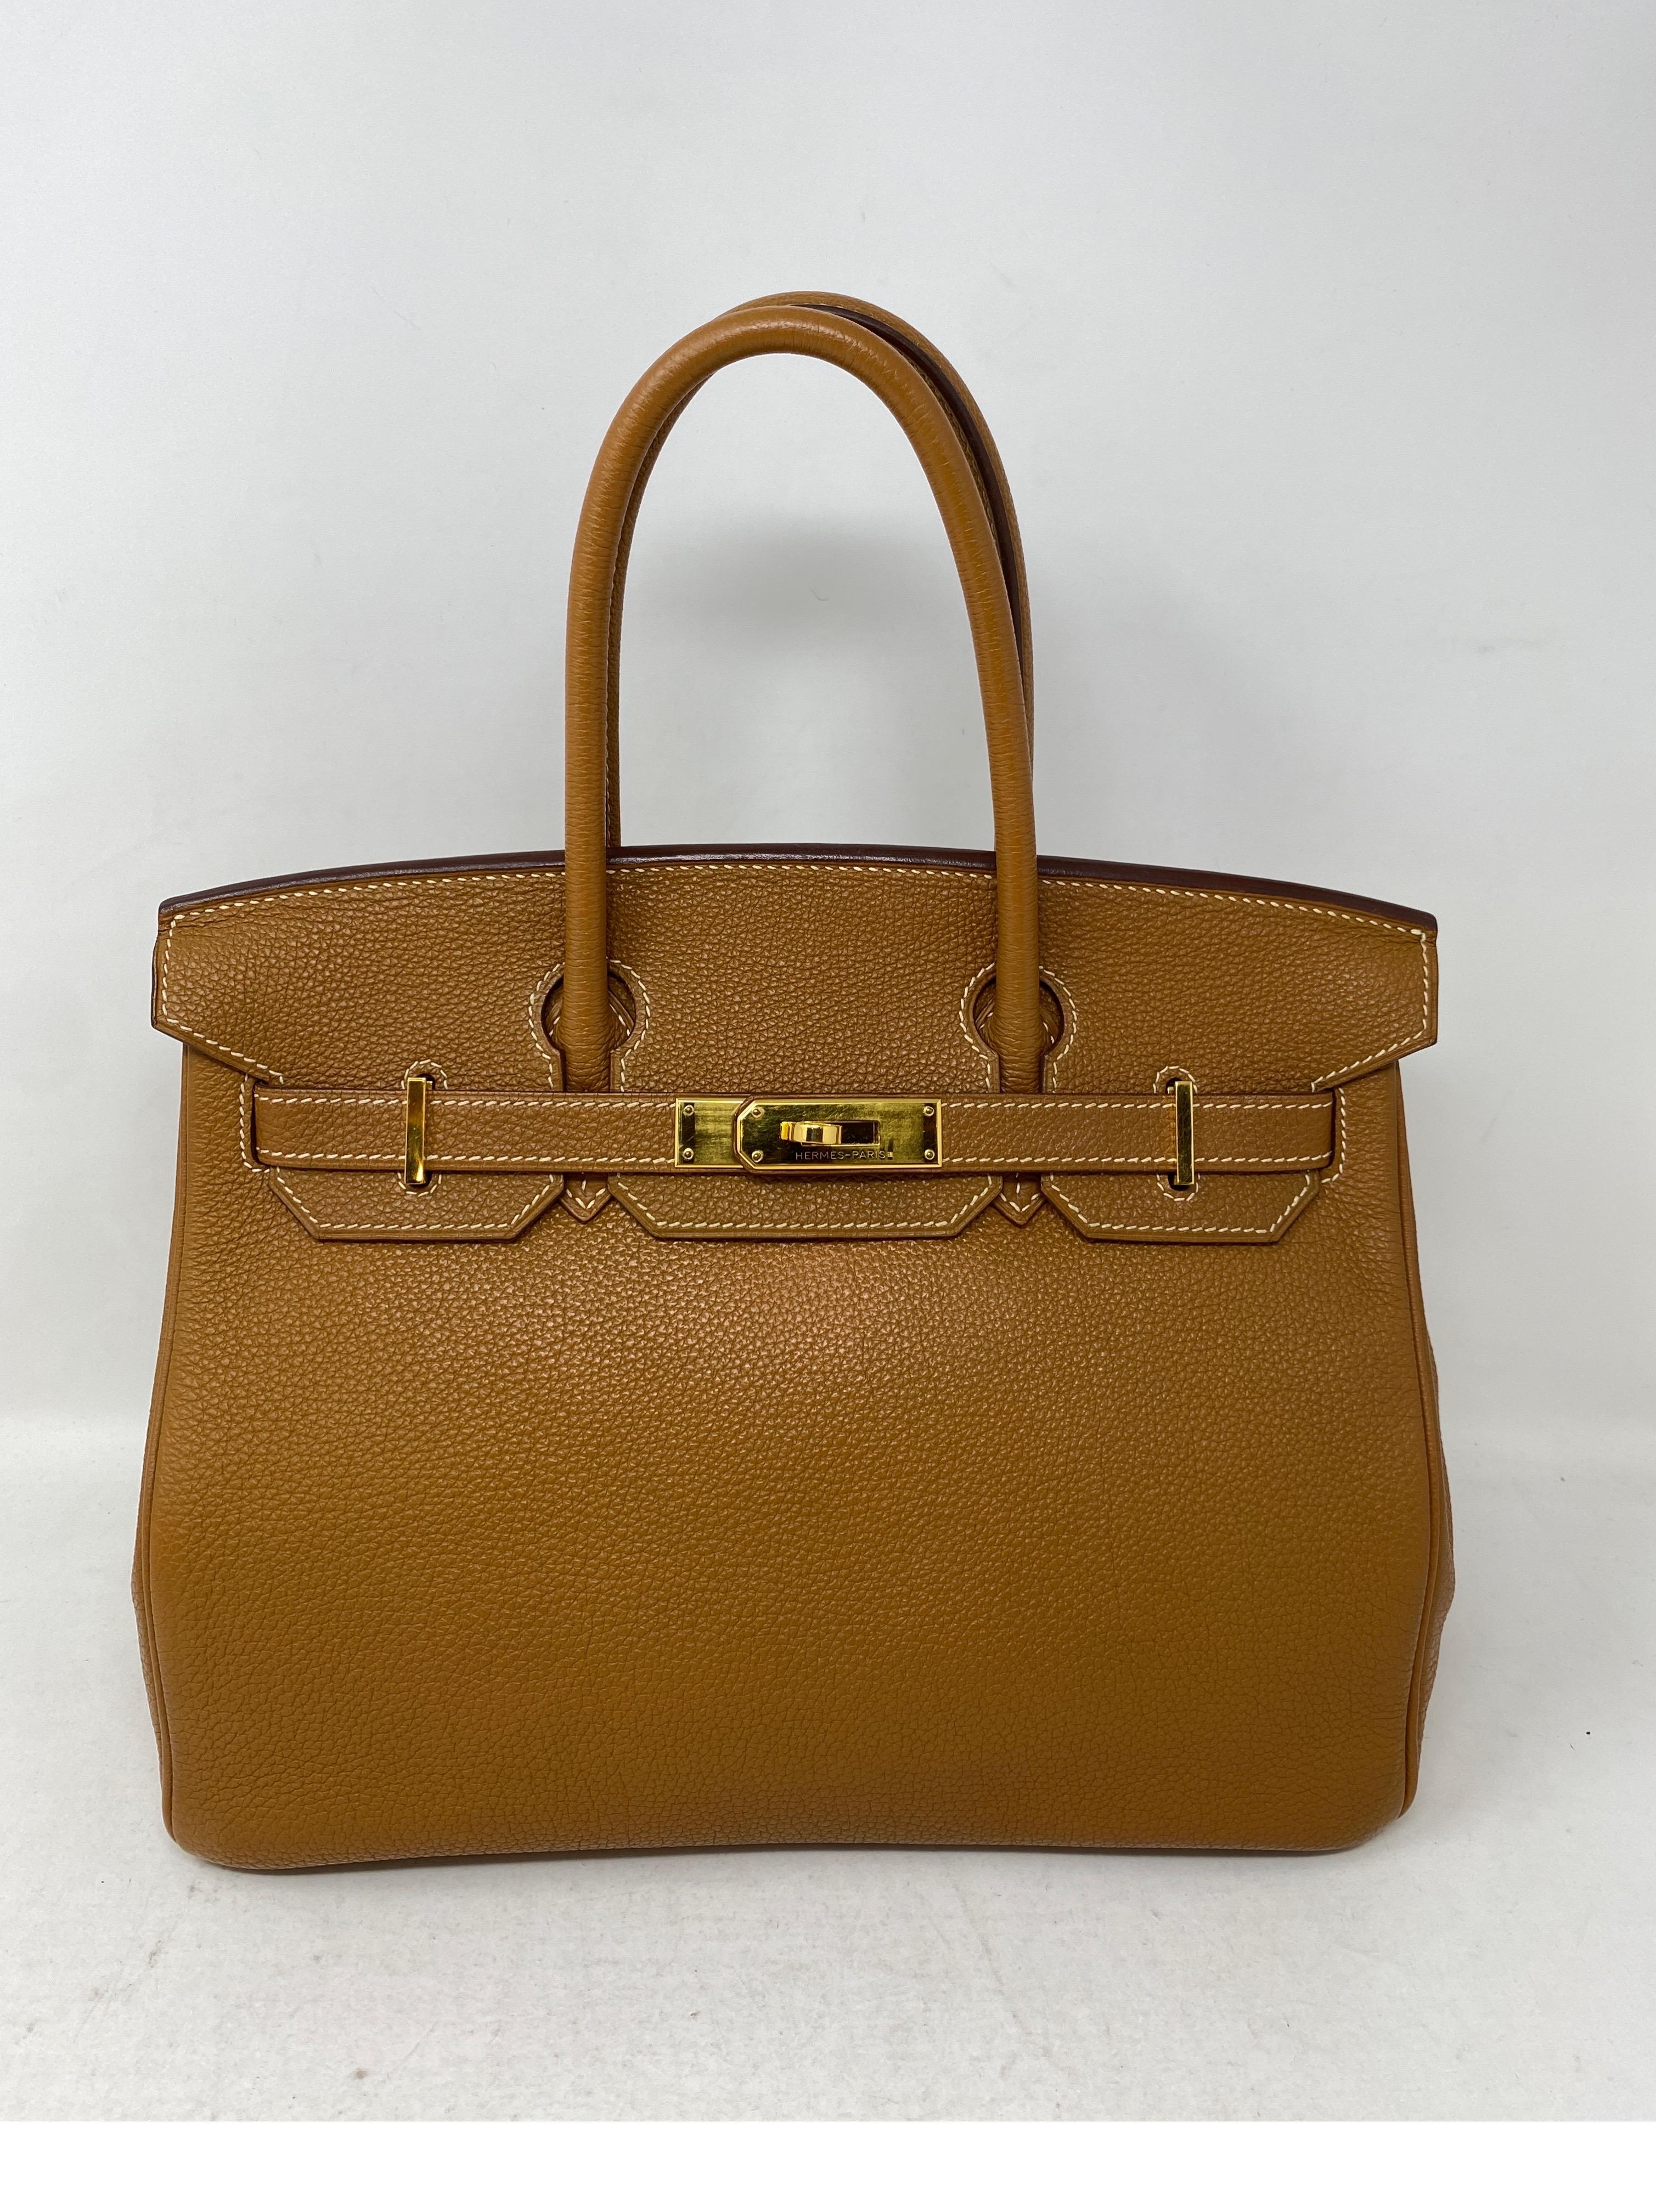 Hermes Gold Birkin 30 Bag. Excellent condition. Most wanted color combination. Gold color leather with gold hardware. Hard to find size 30. Togo leather. Includes clochette, lock, keys, and dust cover. Guaranteed authentic. 